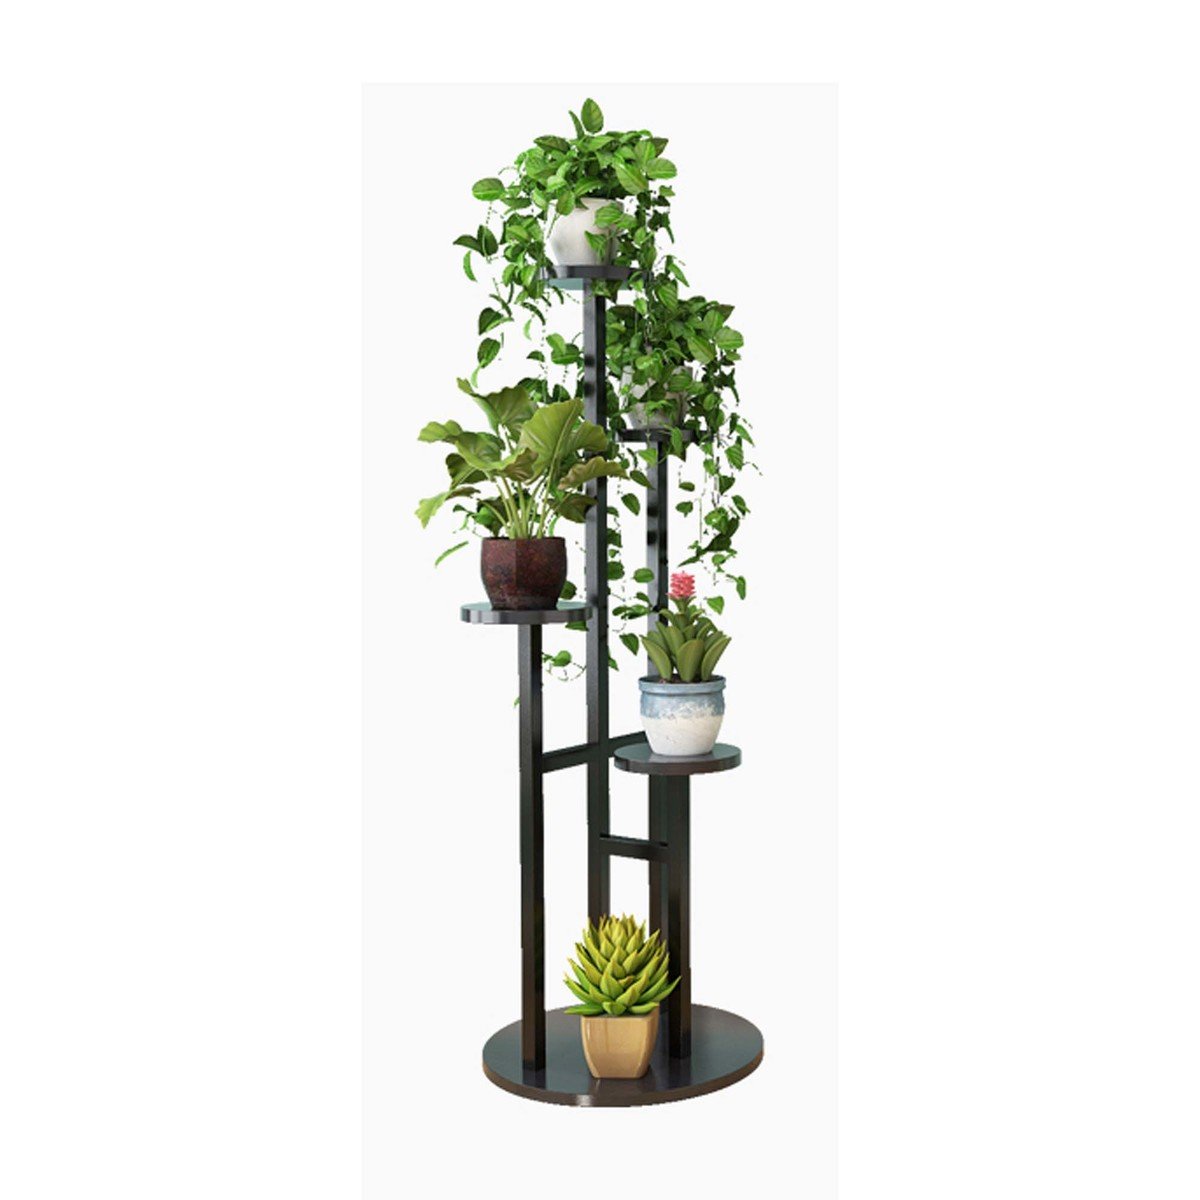 Maple Leaf Home Flower Stand FS-03 Black 100x40x40cm (Pot & Plant Not Included)